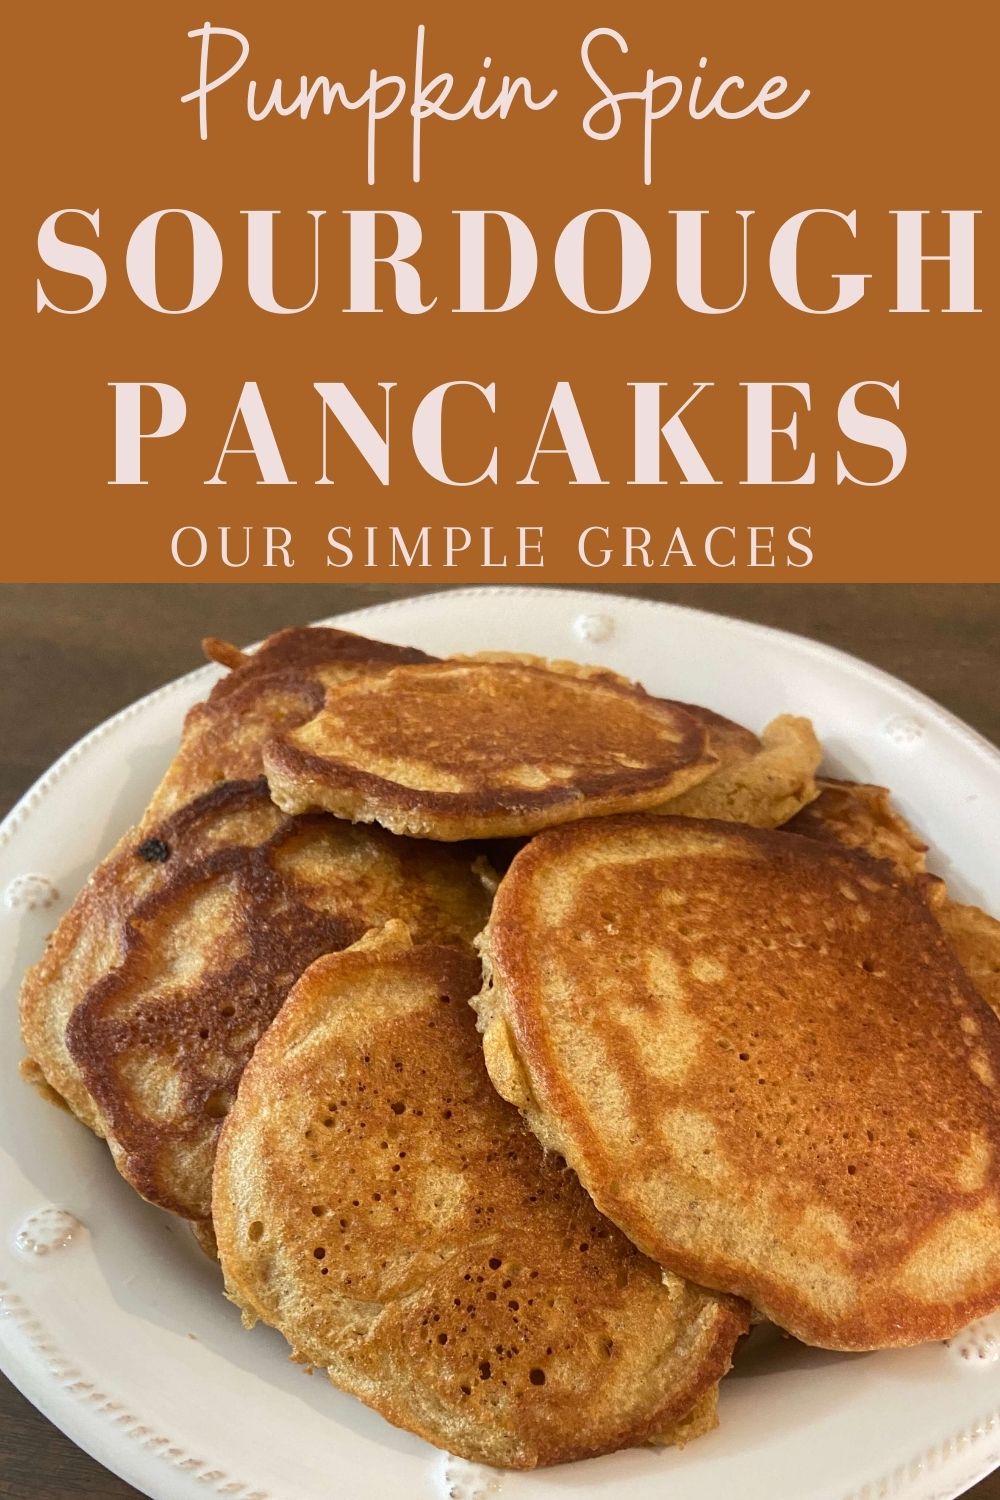 plate og pumpkin spice sourdough pancakes with recipe name above